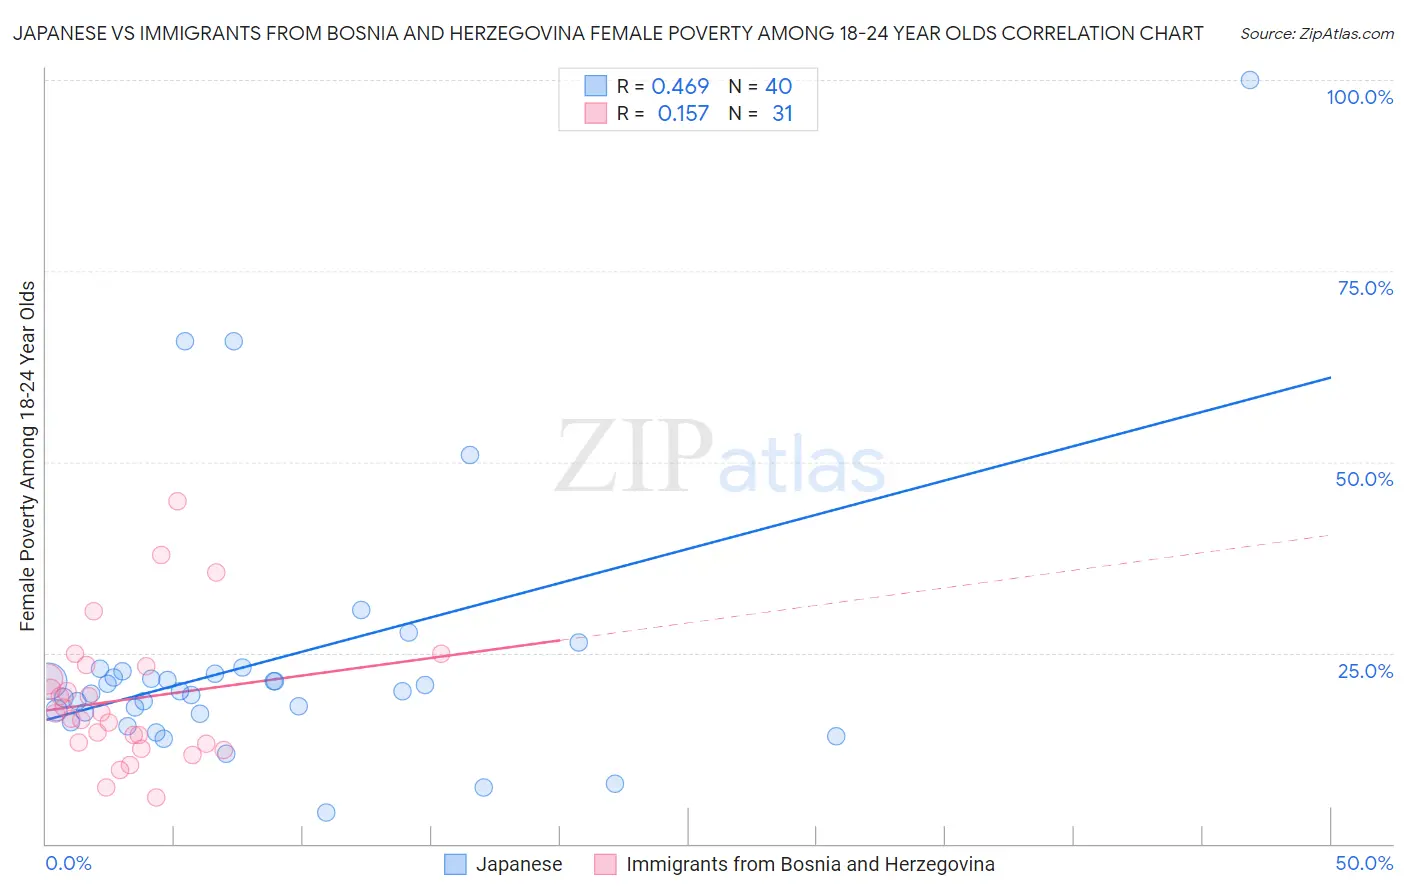 Japanese vs Immigrants from Bosnia and Herzegovina Female Poverty Among 18-24 Year Olds